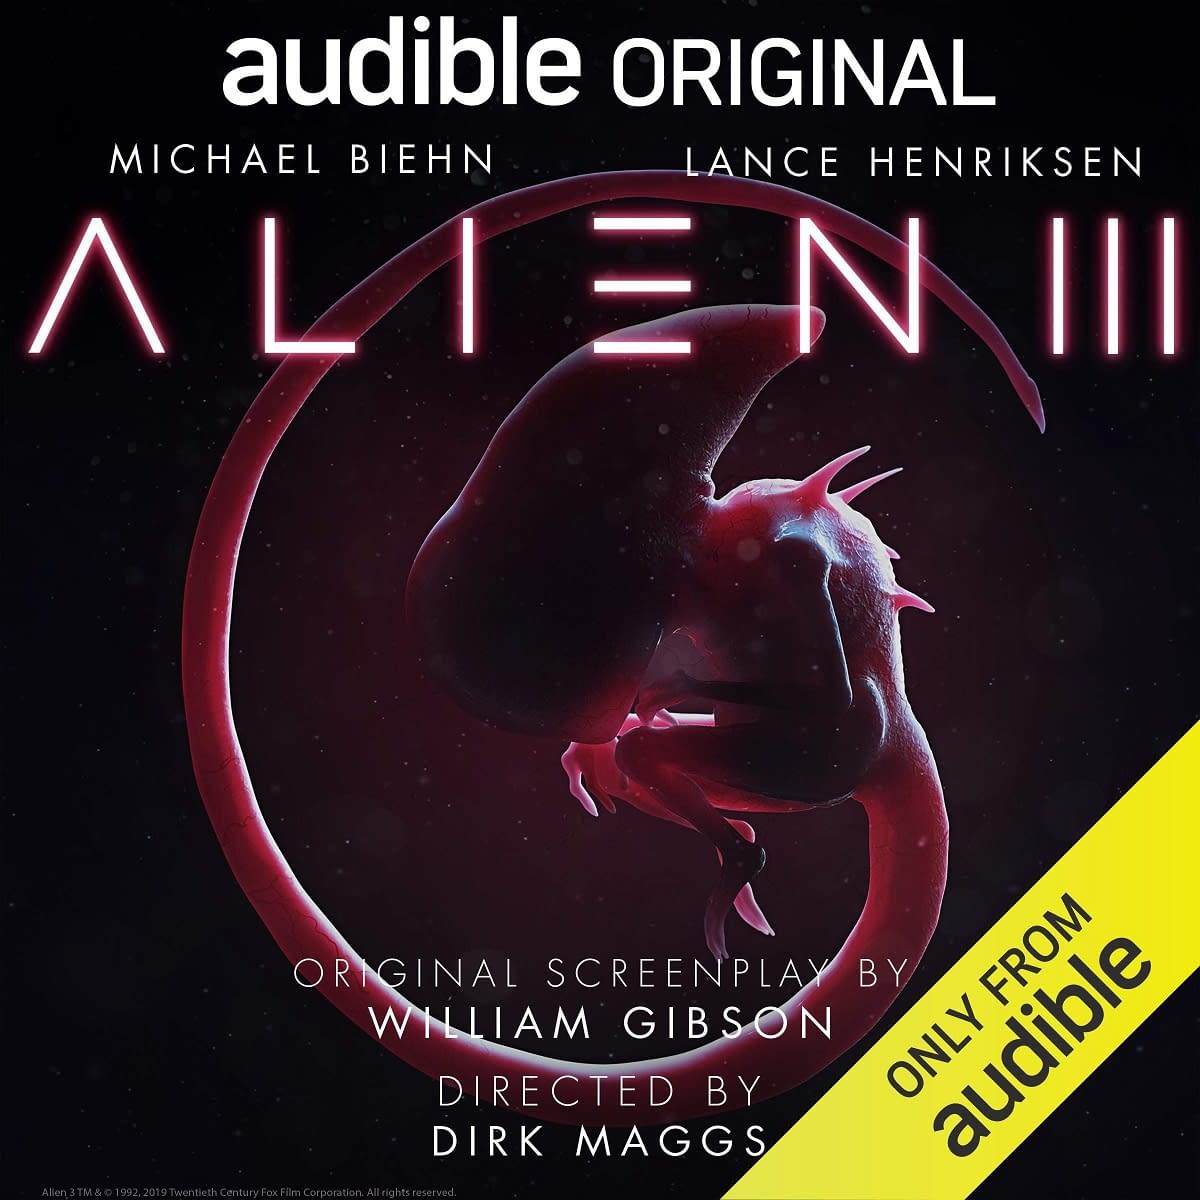 William Gibson's Alien III: The Path from Screenplay to Audio Play